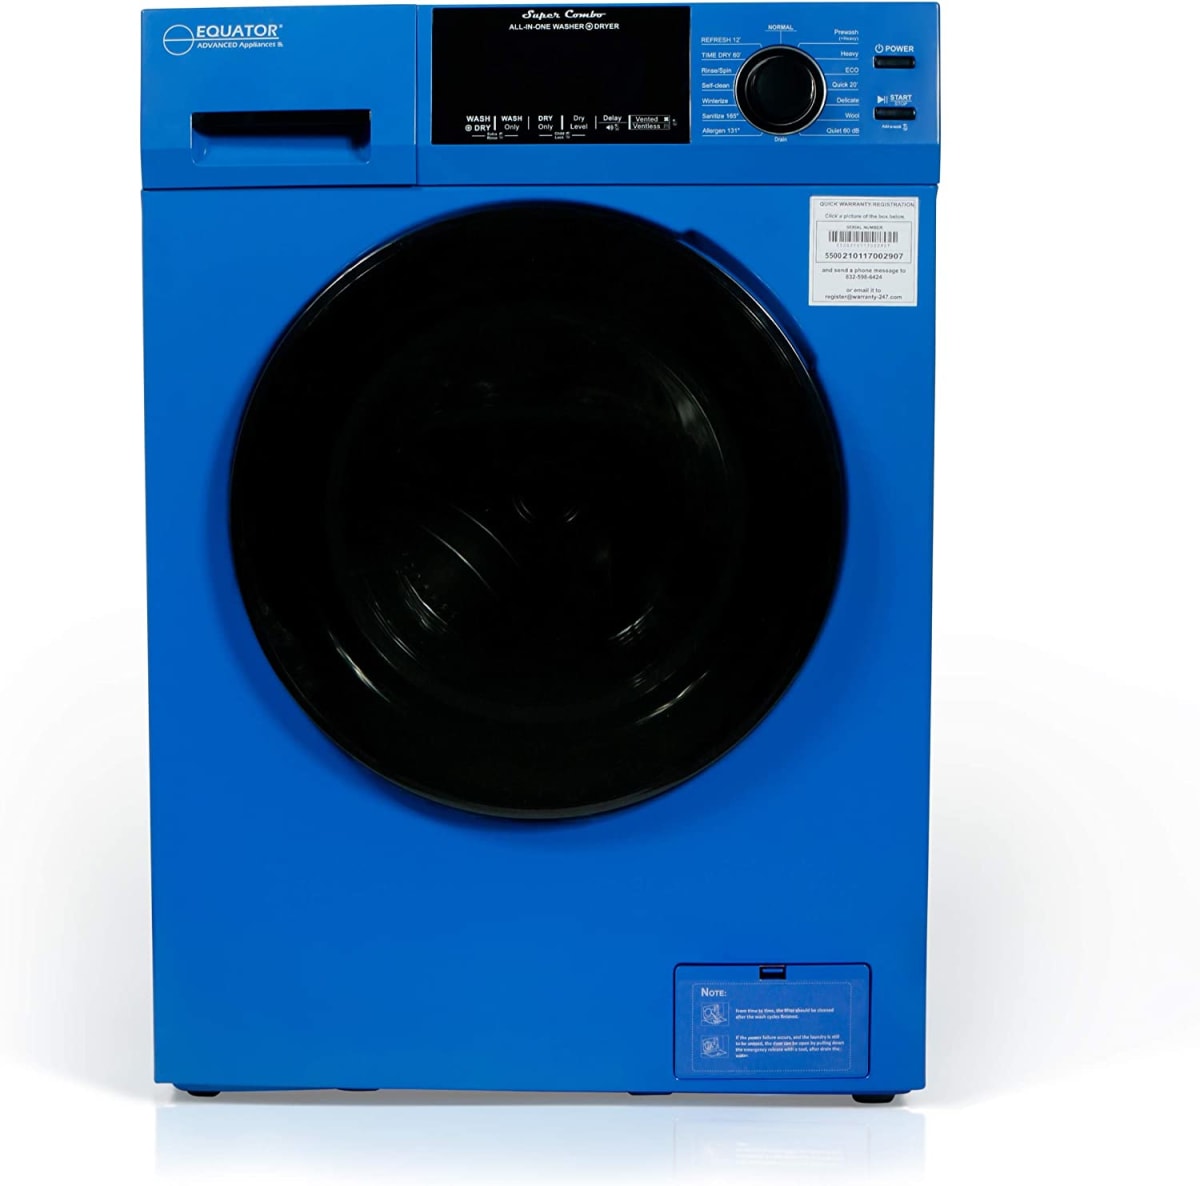 Ver 3 Combo Washer Vented/Ventless Dry